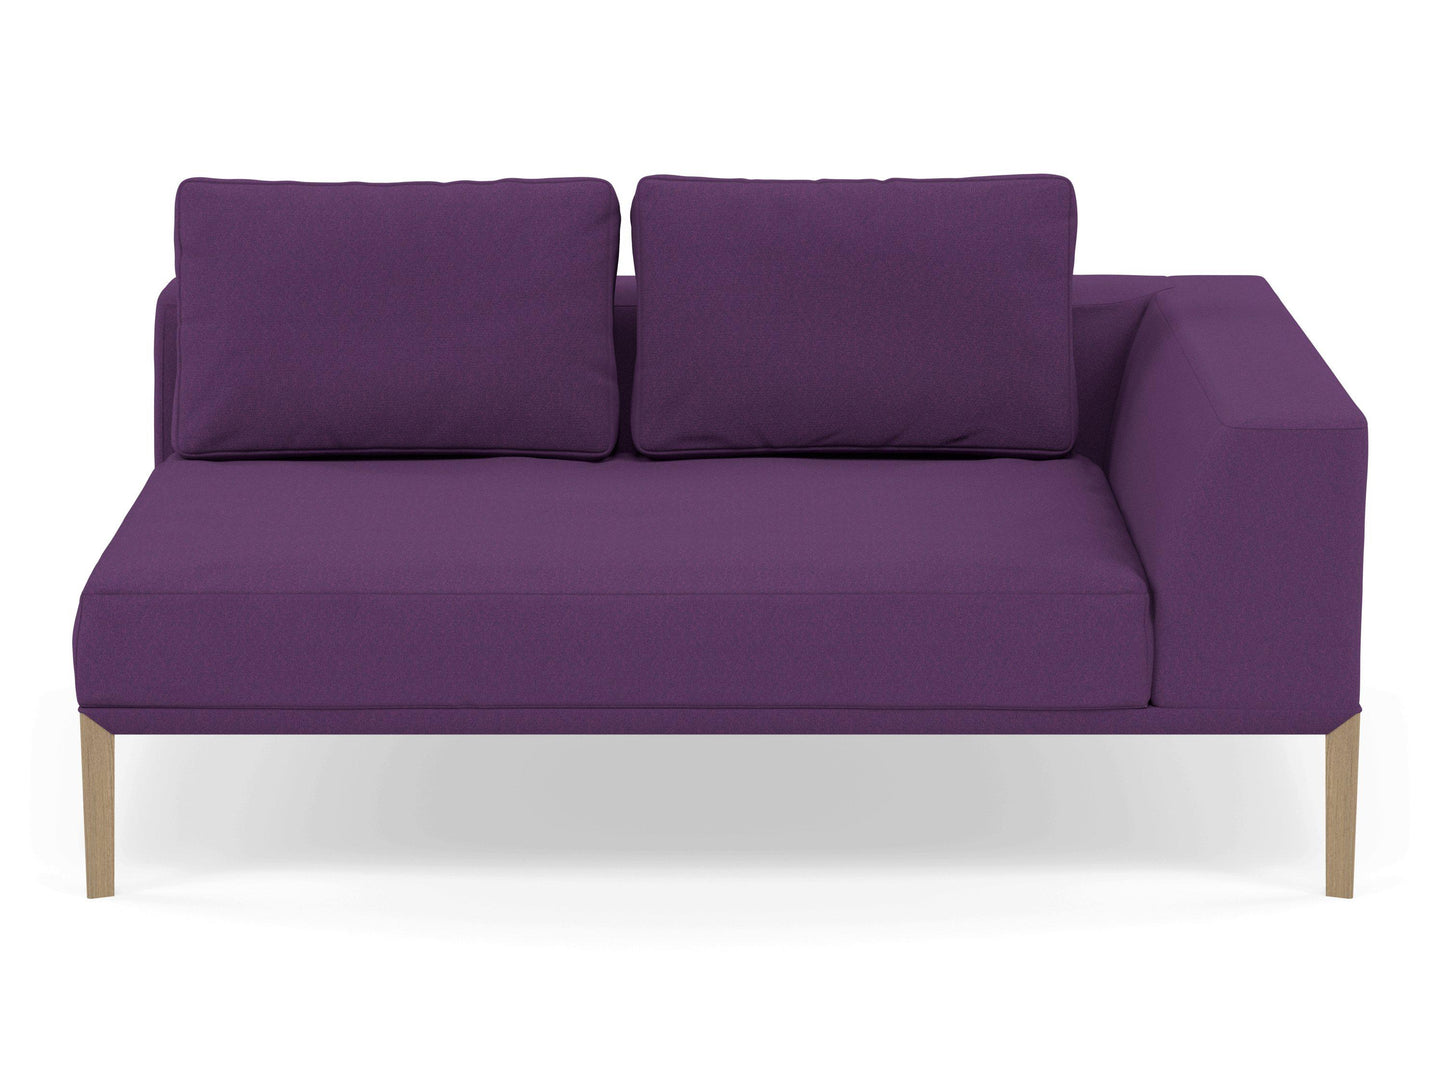 Modern 2 Seater Chaise Lounge Style Sofa with Left Armrest in Deep Purple Fabric-Natural Oak-Distinct Designs (London) Ltd